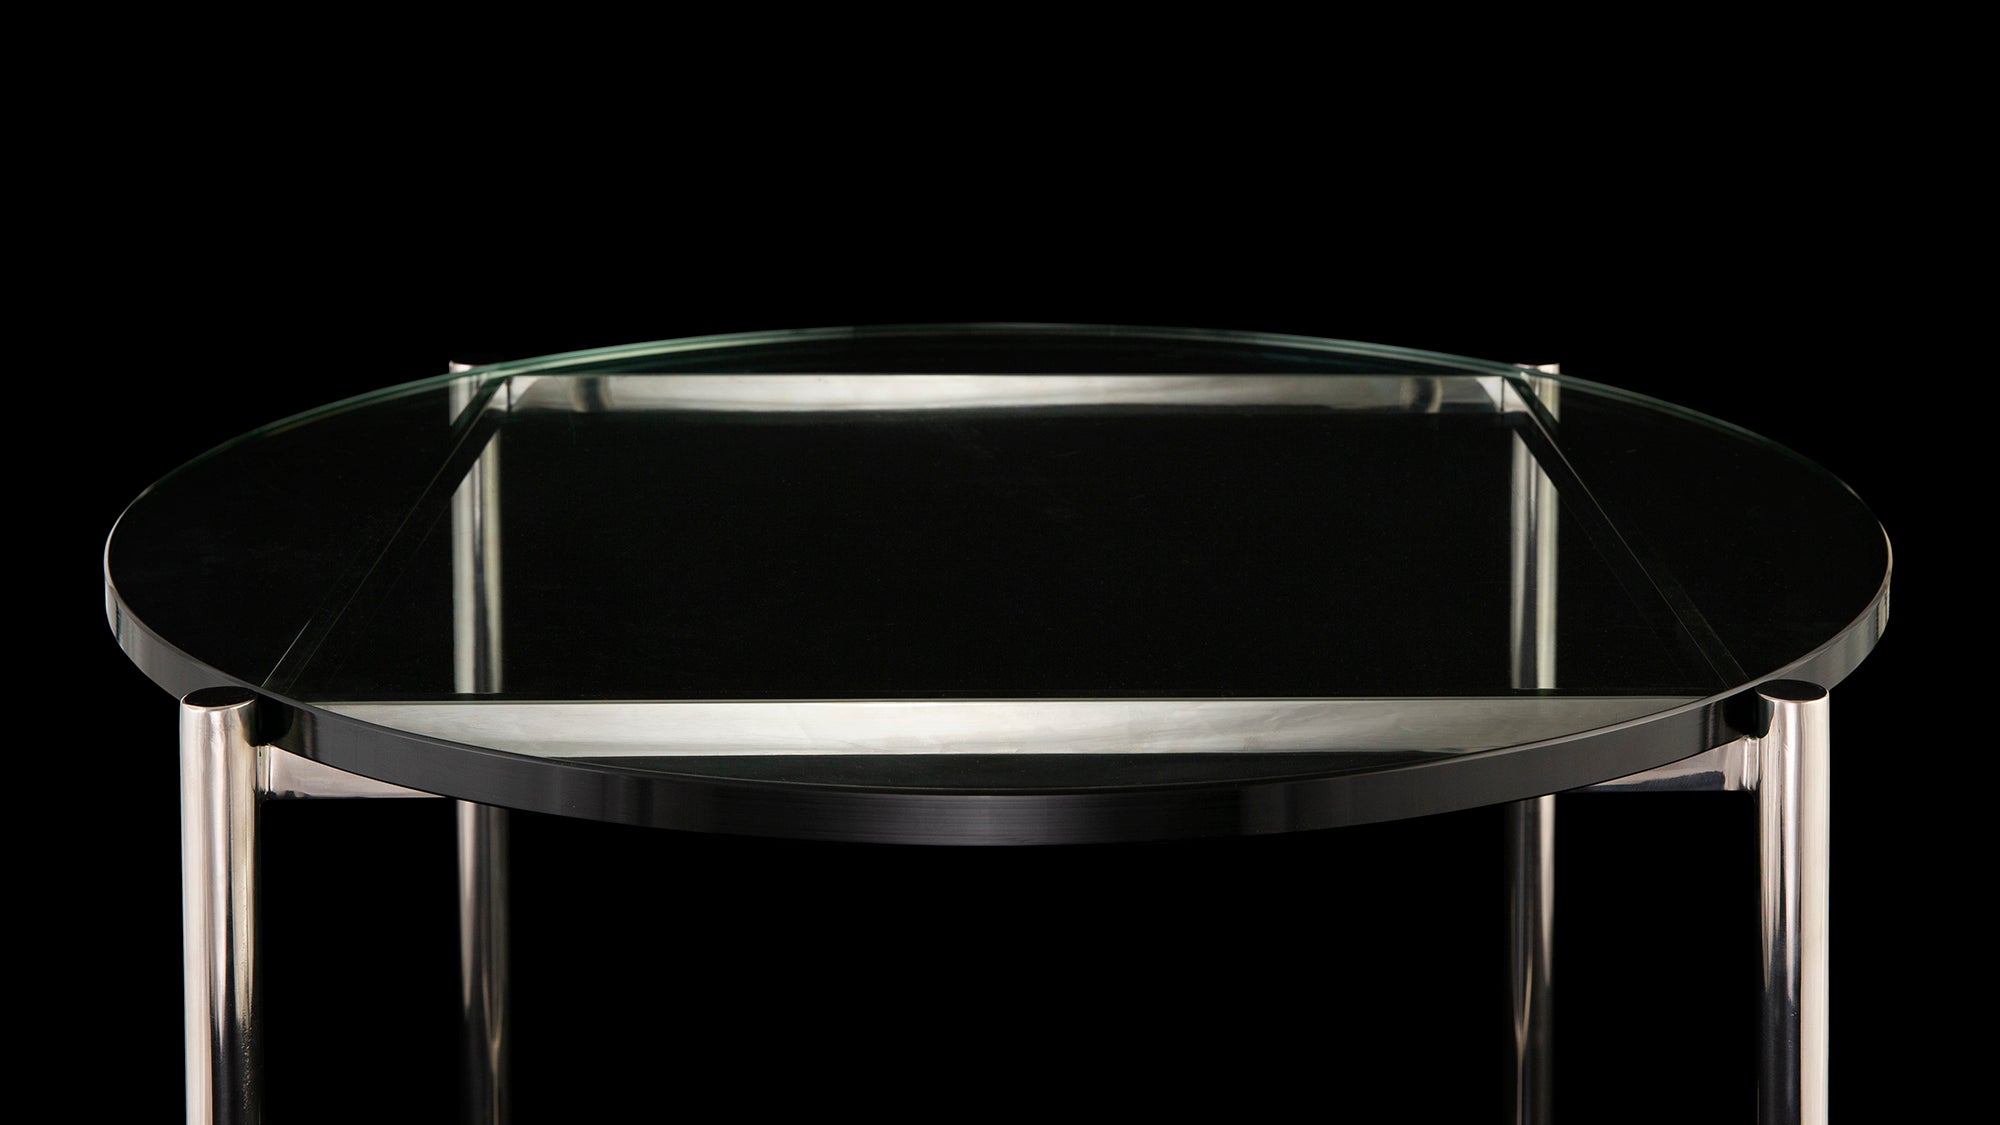 Top angled view of the Barcelona Occasional table on a black background